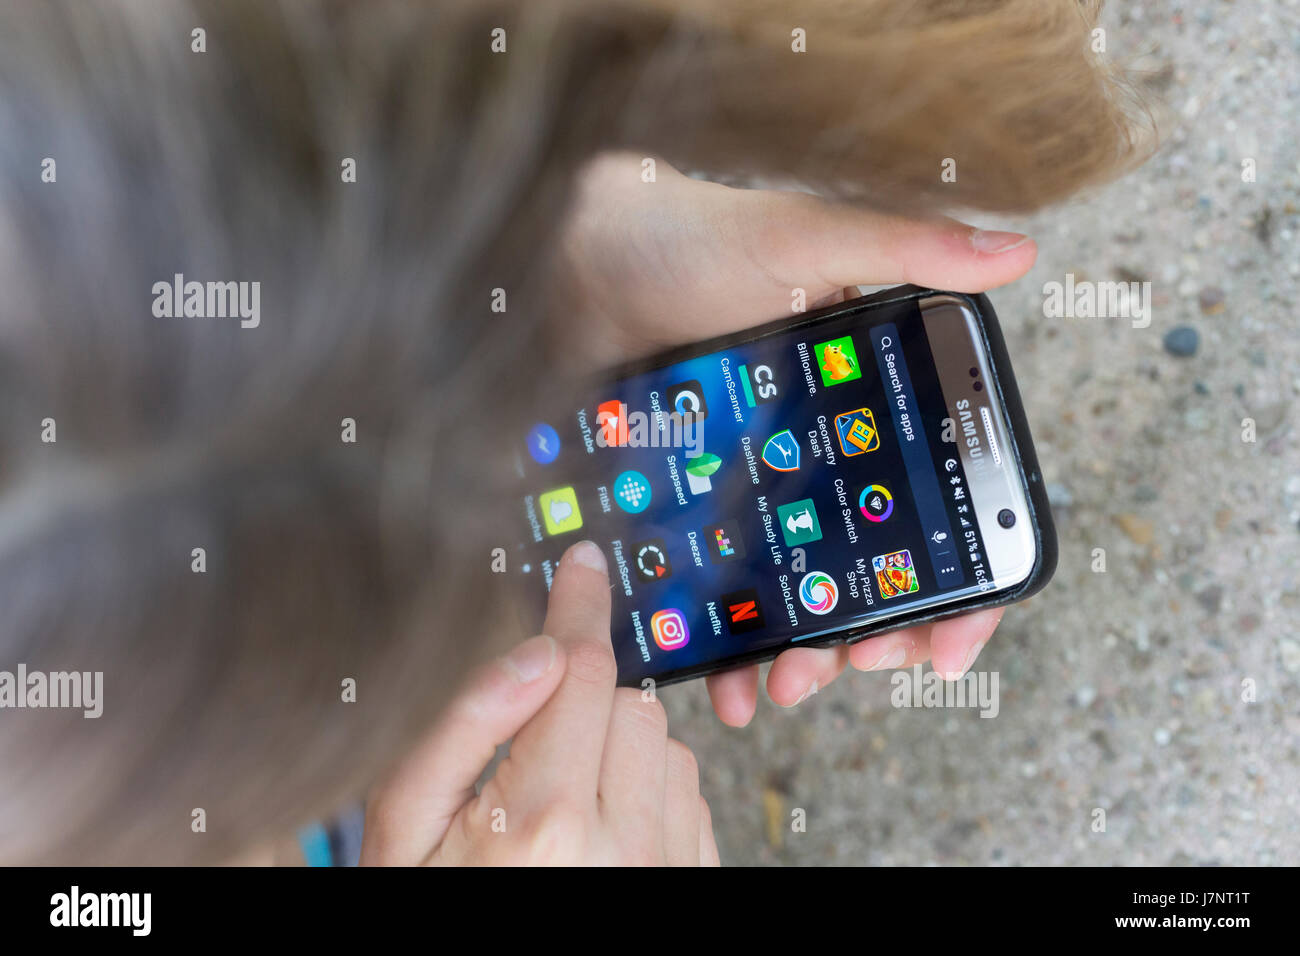 A girl using touchscreen mobile phone / smartphone apps Stock Photo